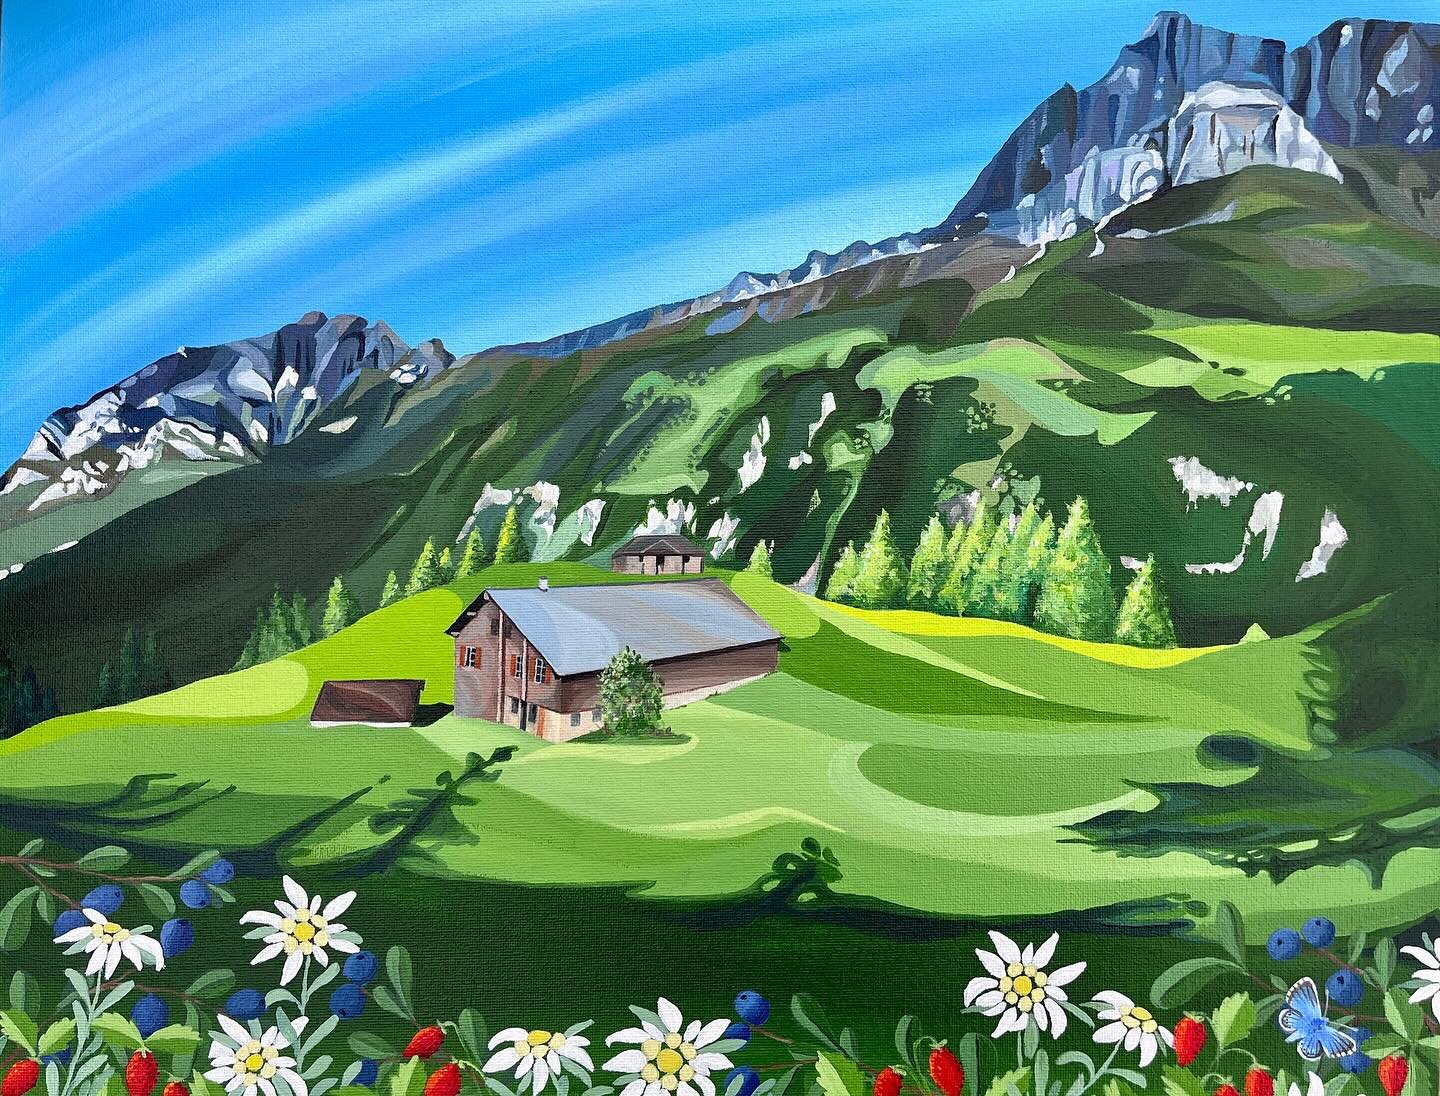 Let me take you to the Switzerland 🇨🇭&hellip;&hellip;beautiful mountains, edelweiss, alpine fruit&hellip;..thank you to those who asked me paint this lovely scene. 🏔️ 🦋 
#switzerland🇨🇭 #mountains #painting